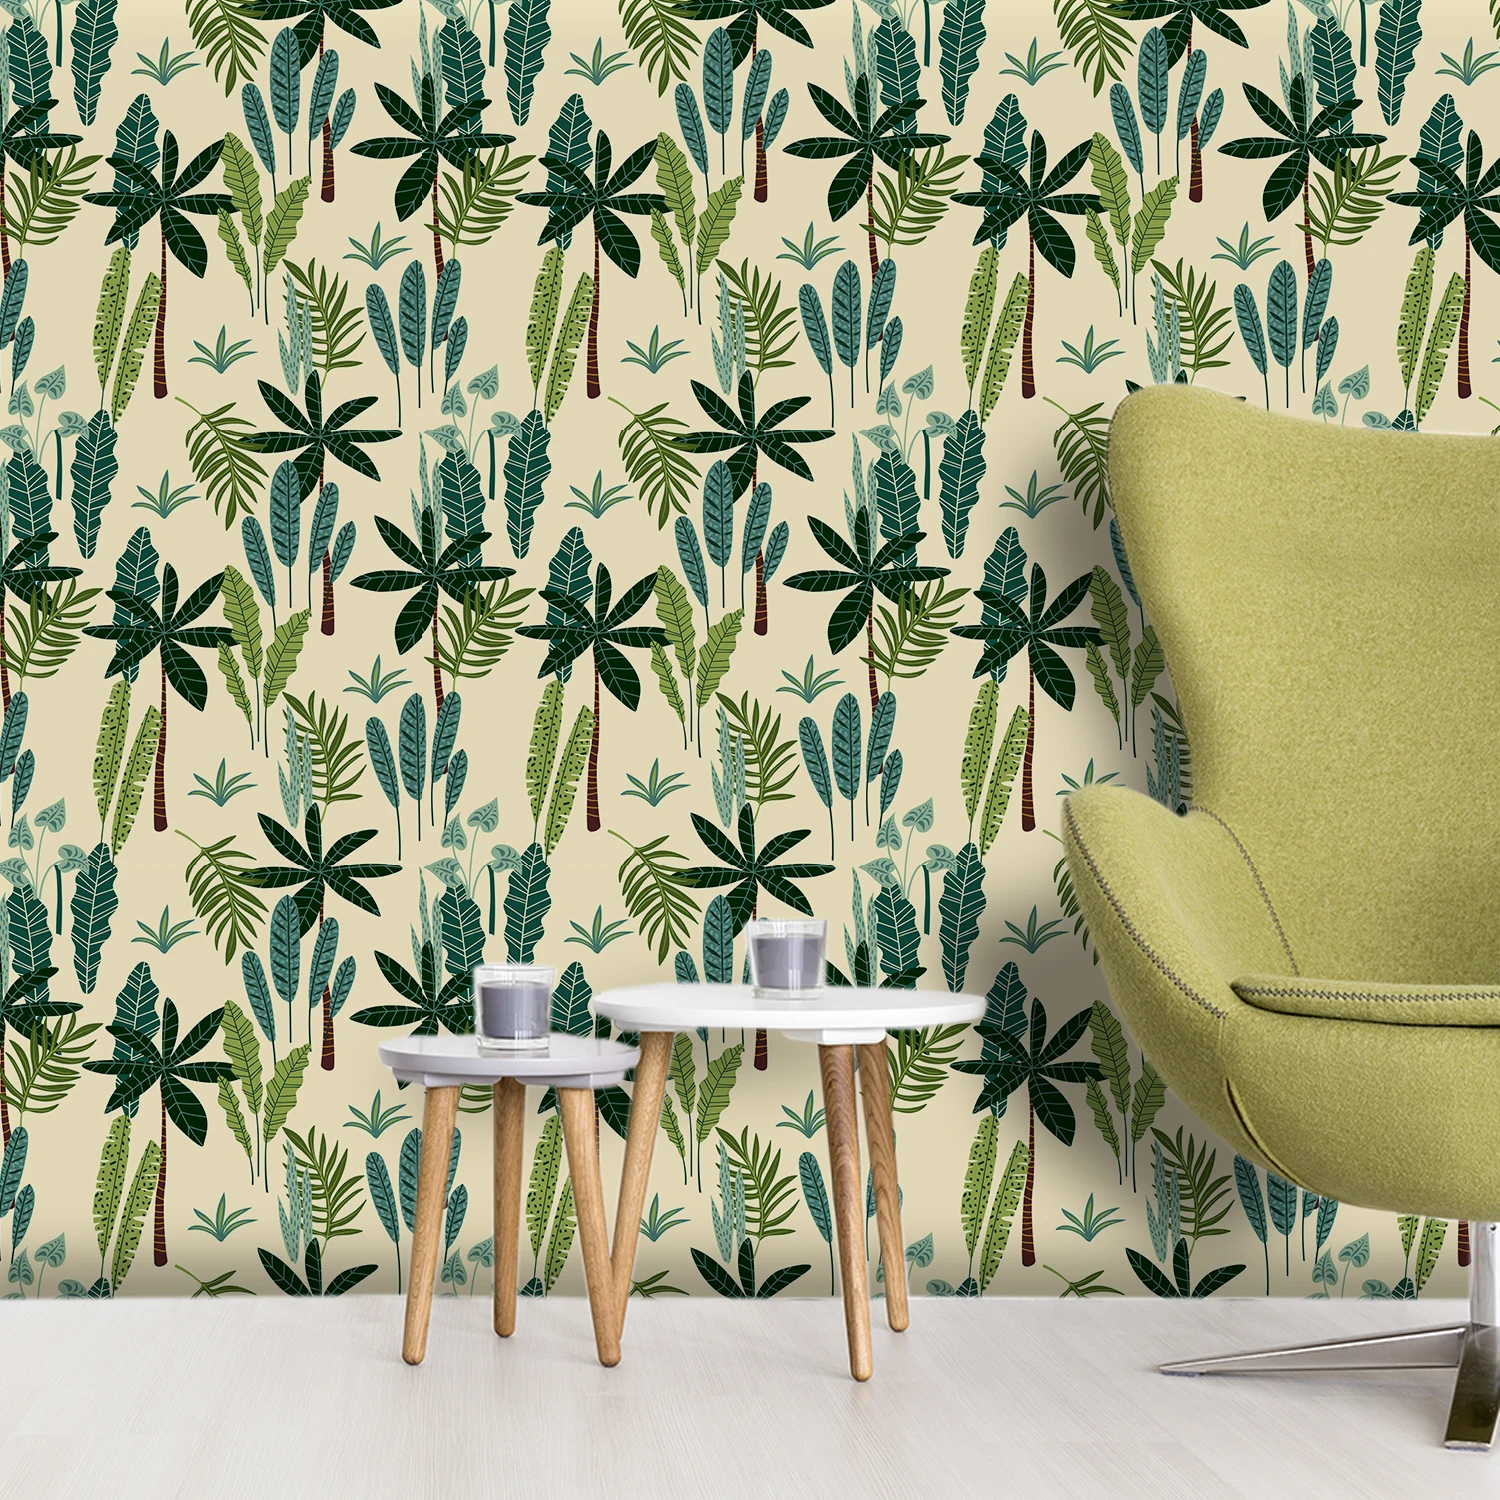 Green Leaf Peel and Stick Wallpaper Self Adhesive Contact Paper Removable  Waterproof Vinyl Wallpaper for Furniture Renovation - AliExpress